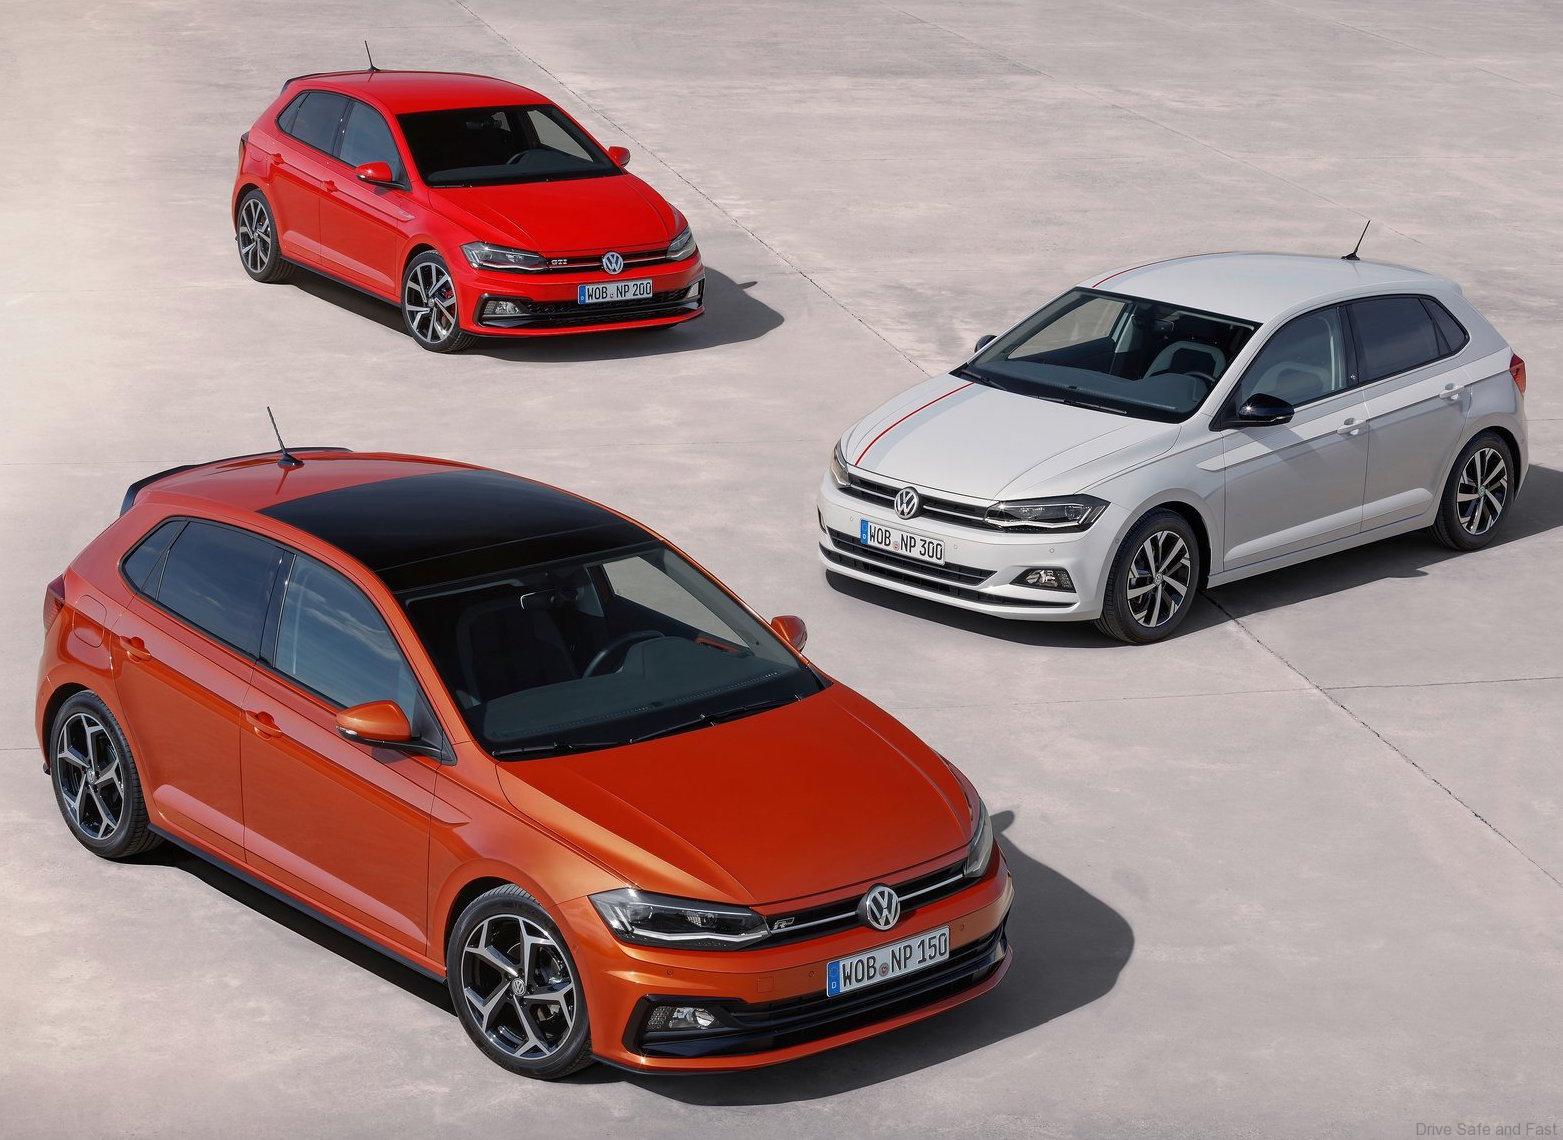 Meet the latest Volkswagen Polo 2017 model – Drive Safe and Fast